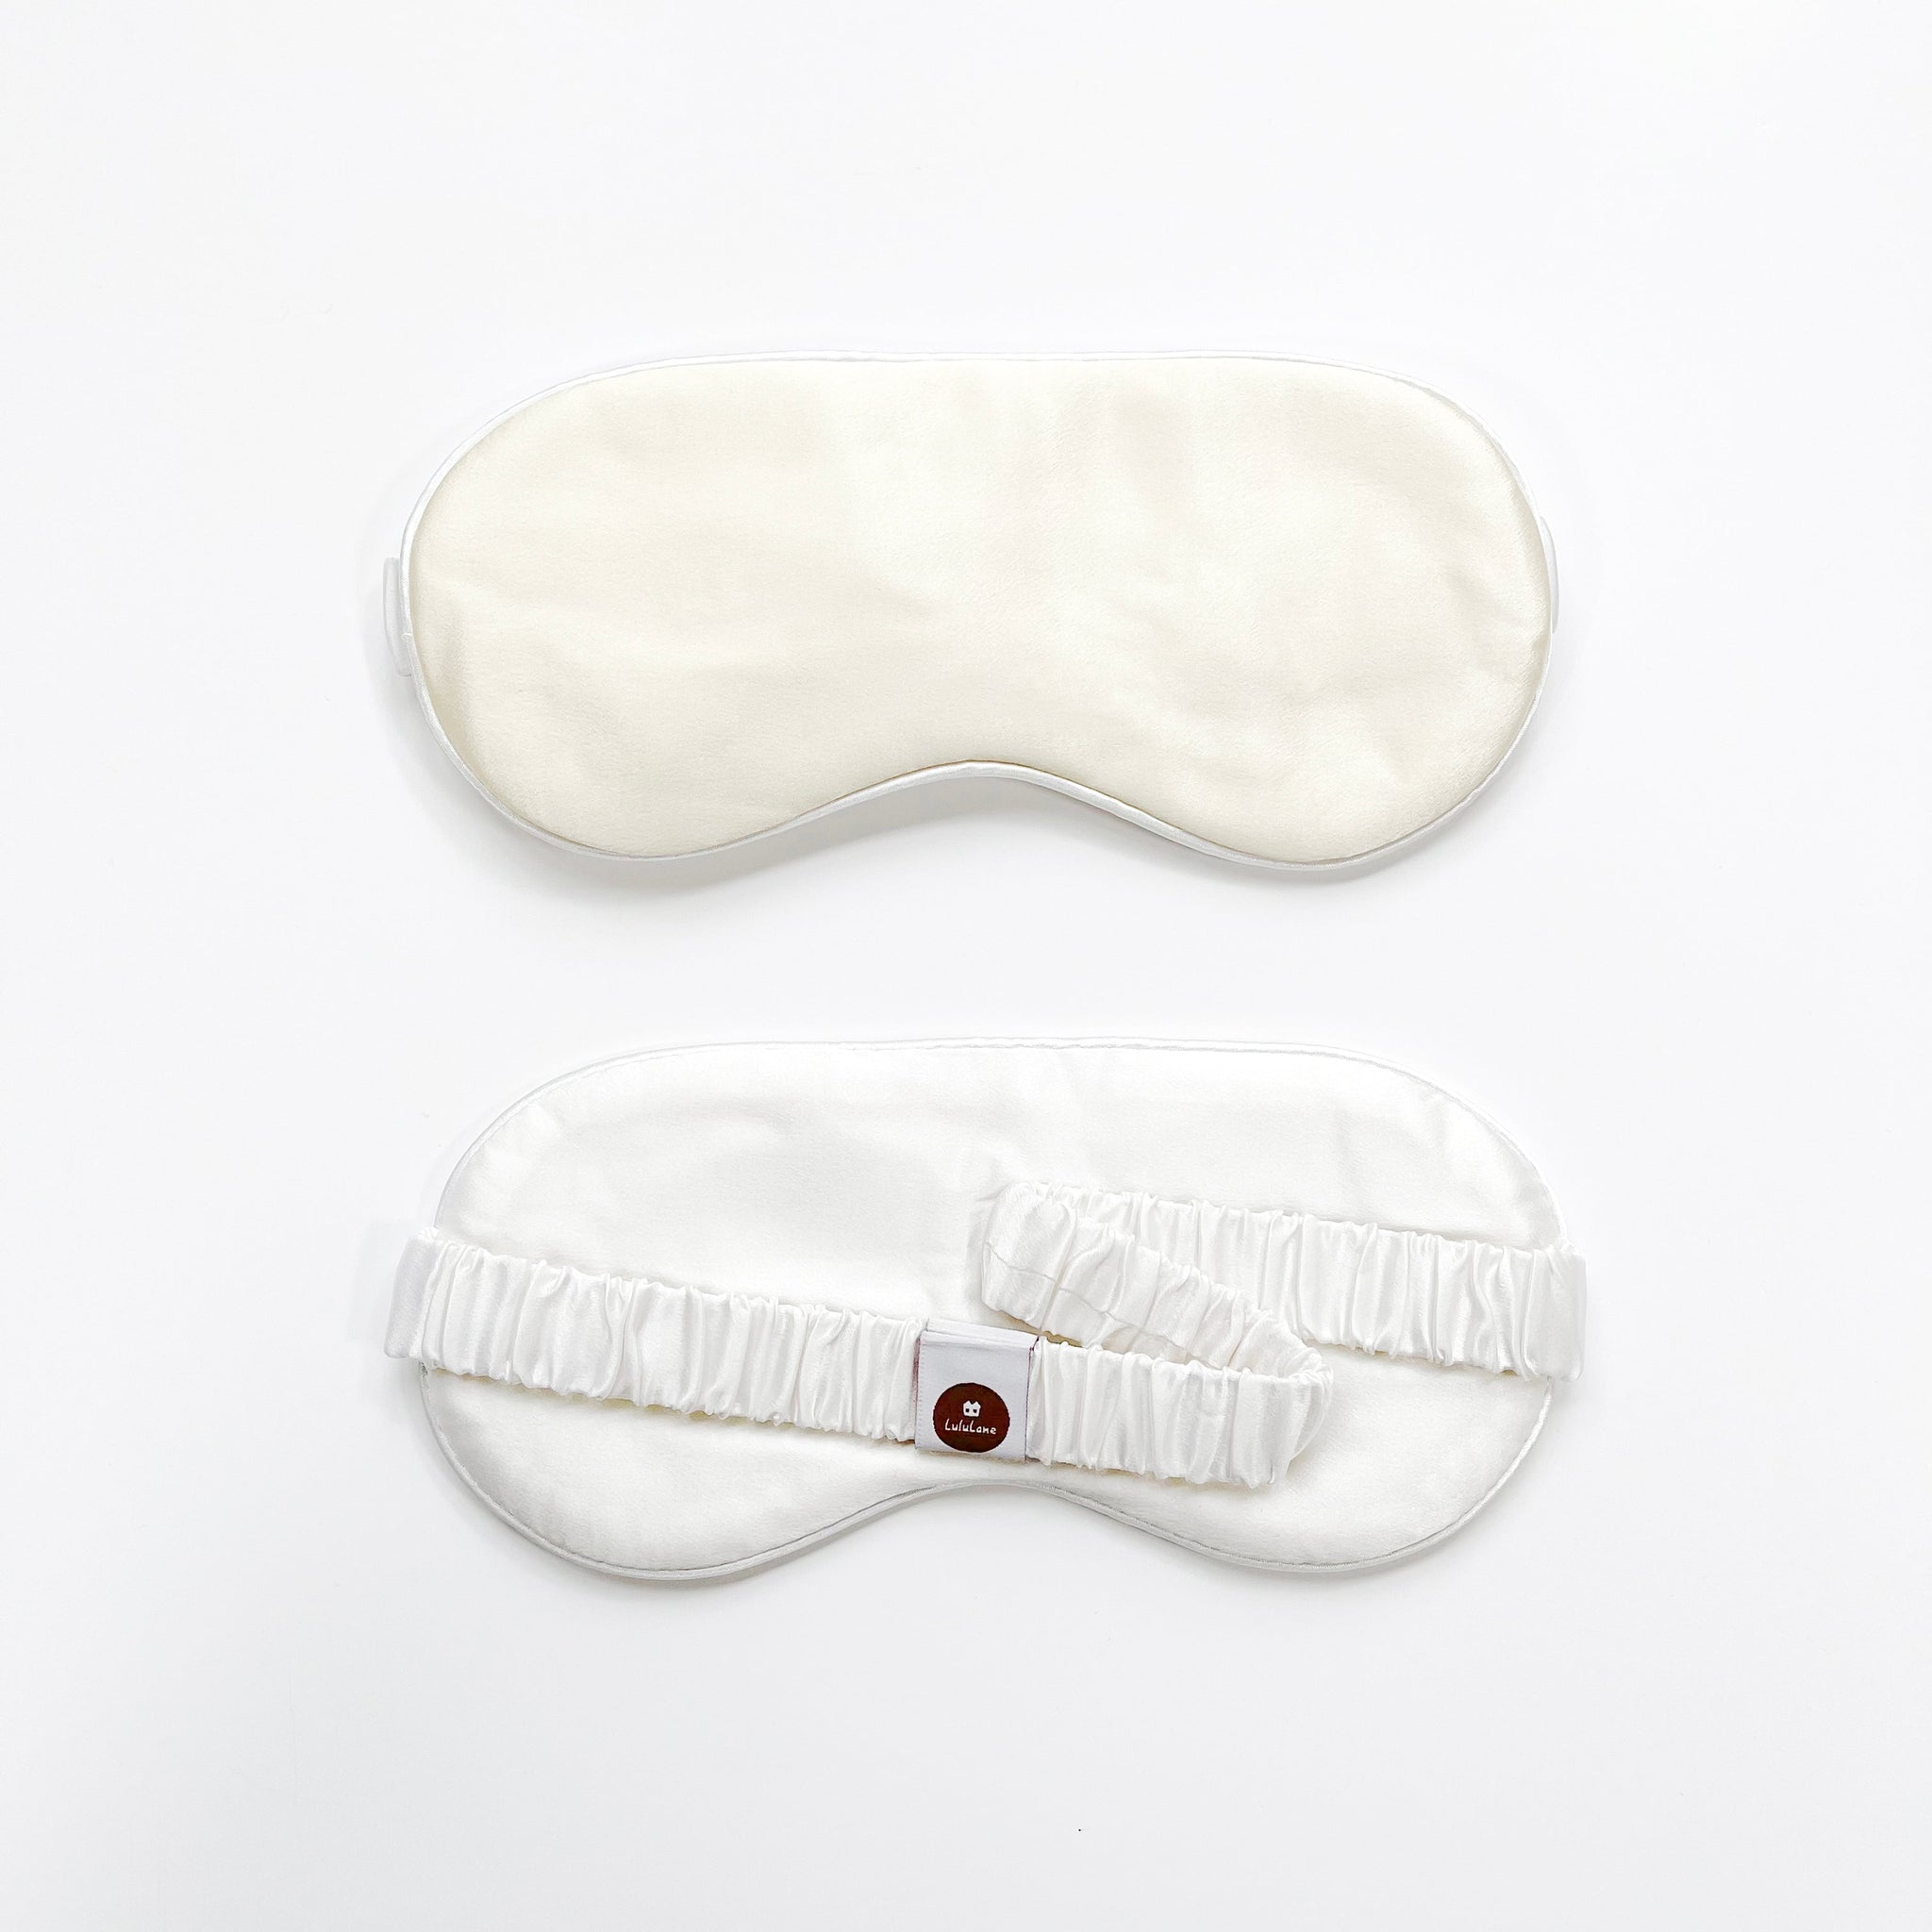 a creamy white silk eye mask with off white back side and elastic strap